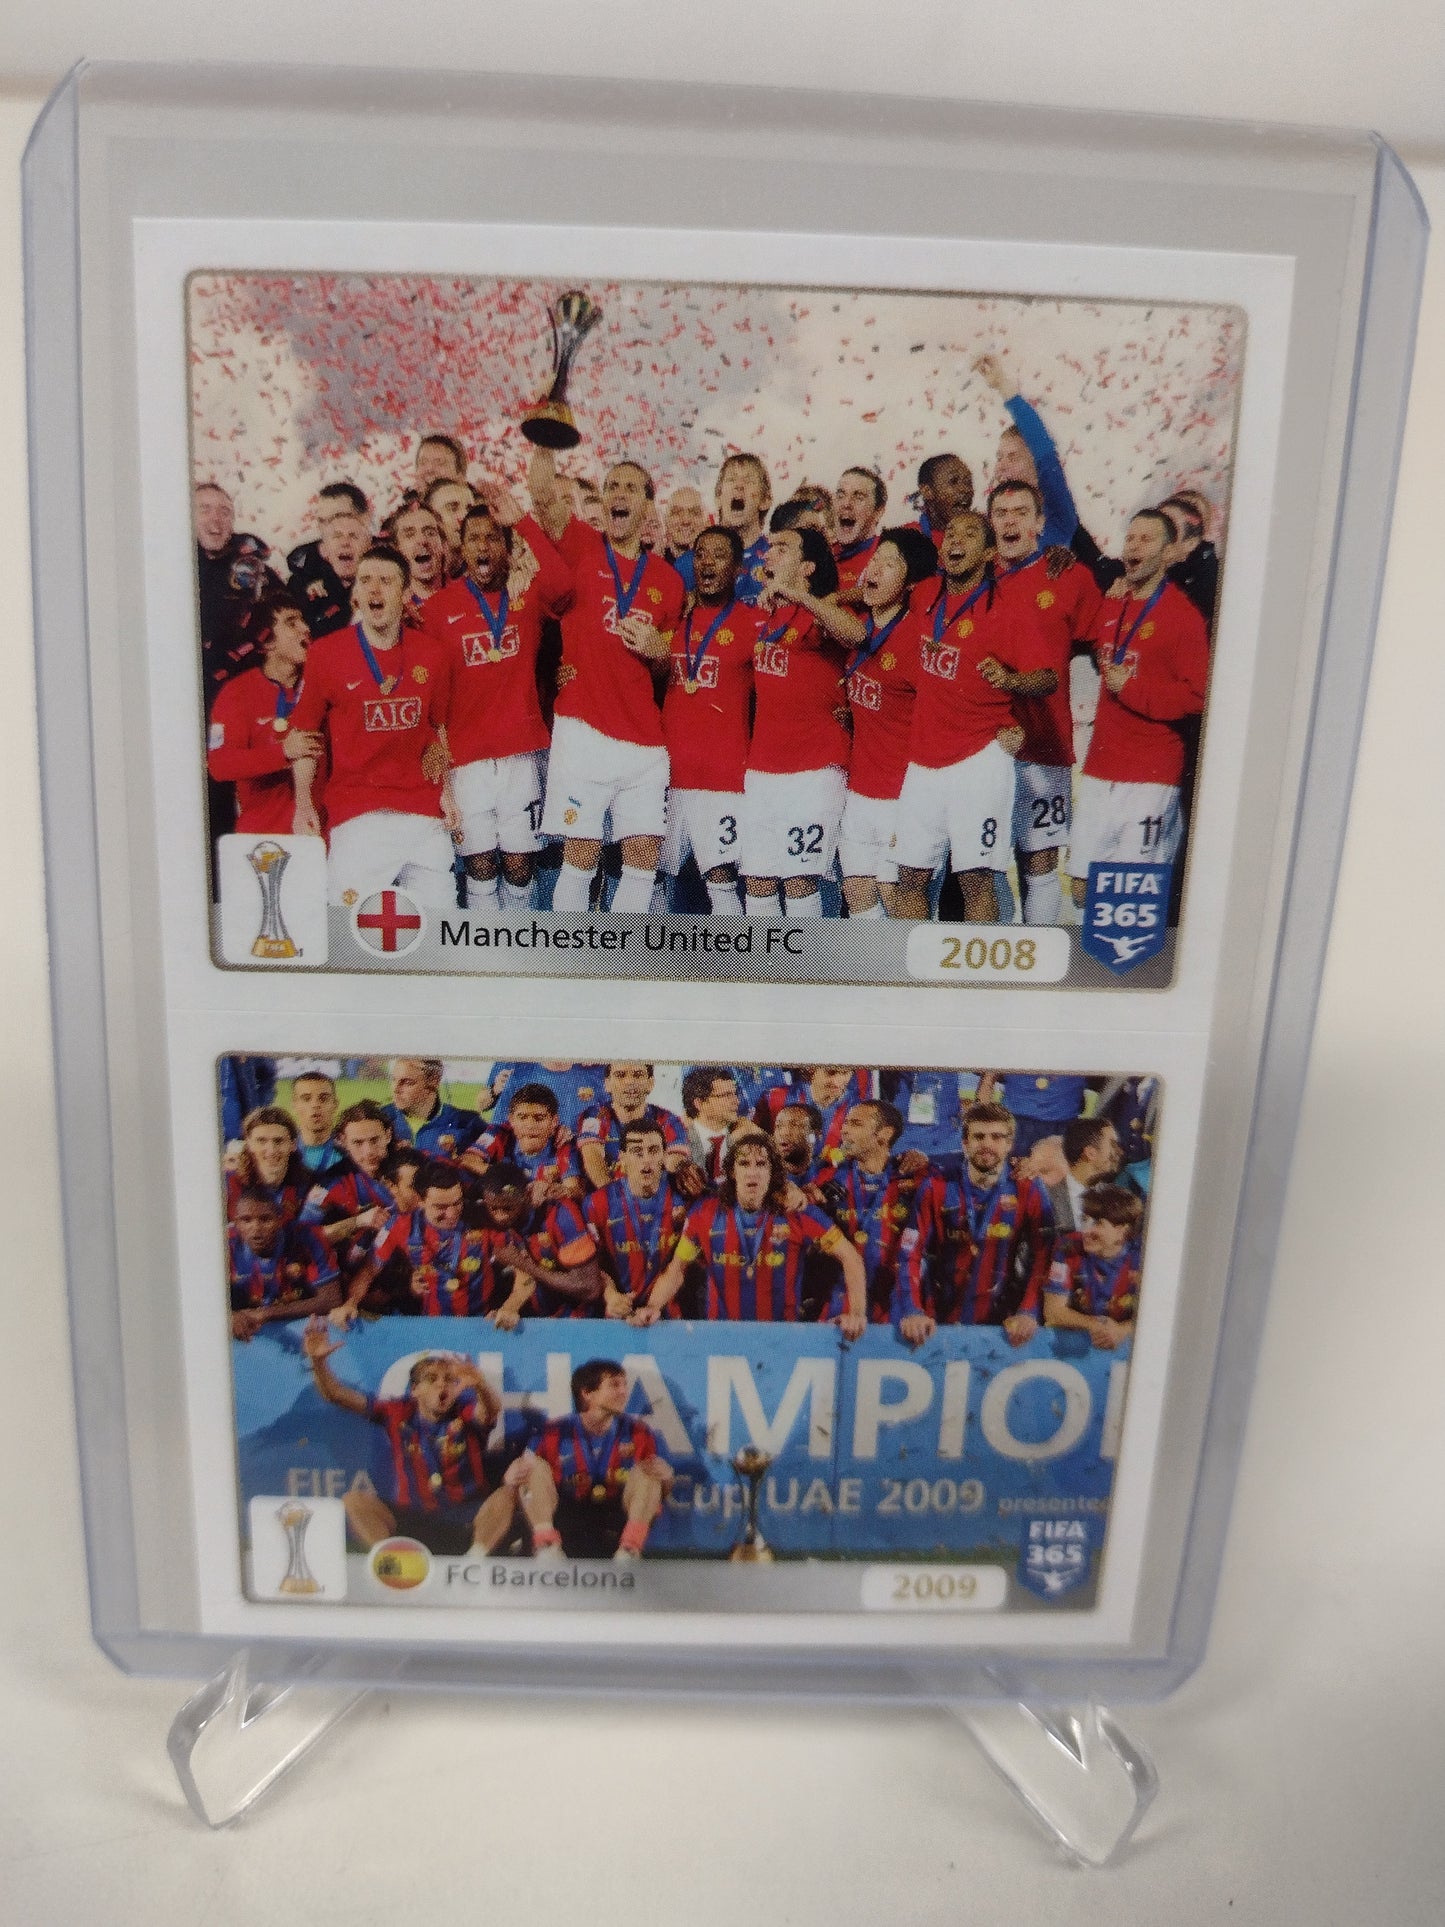 FIFA 365 Stickers FC Barcelona and Manchester United Team 2008 2009 Champions Club World Cup #21 #22